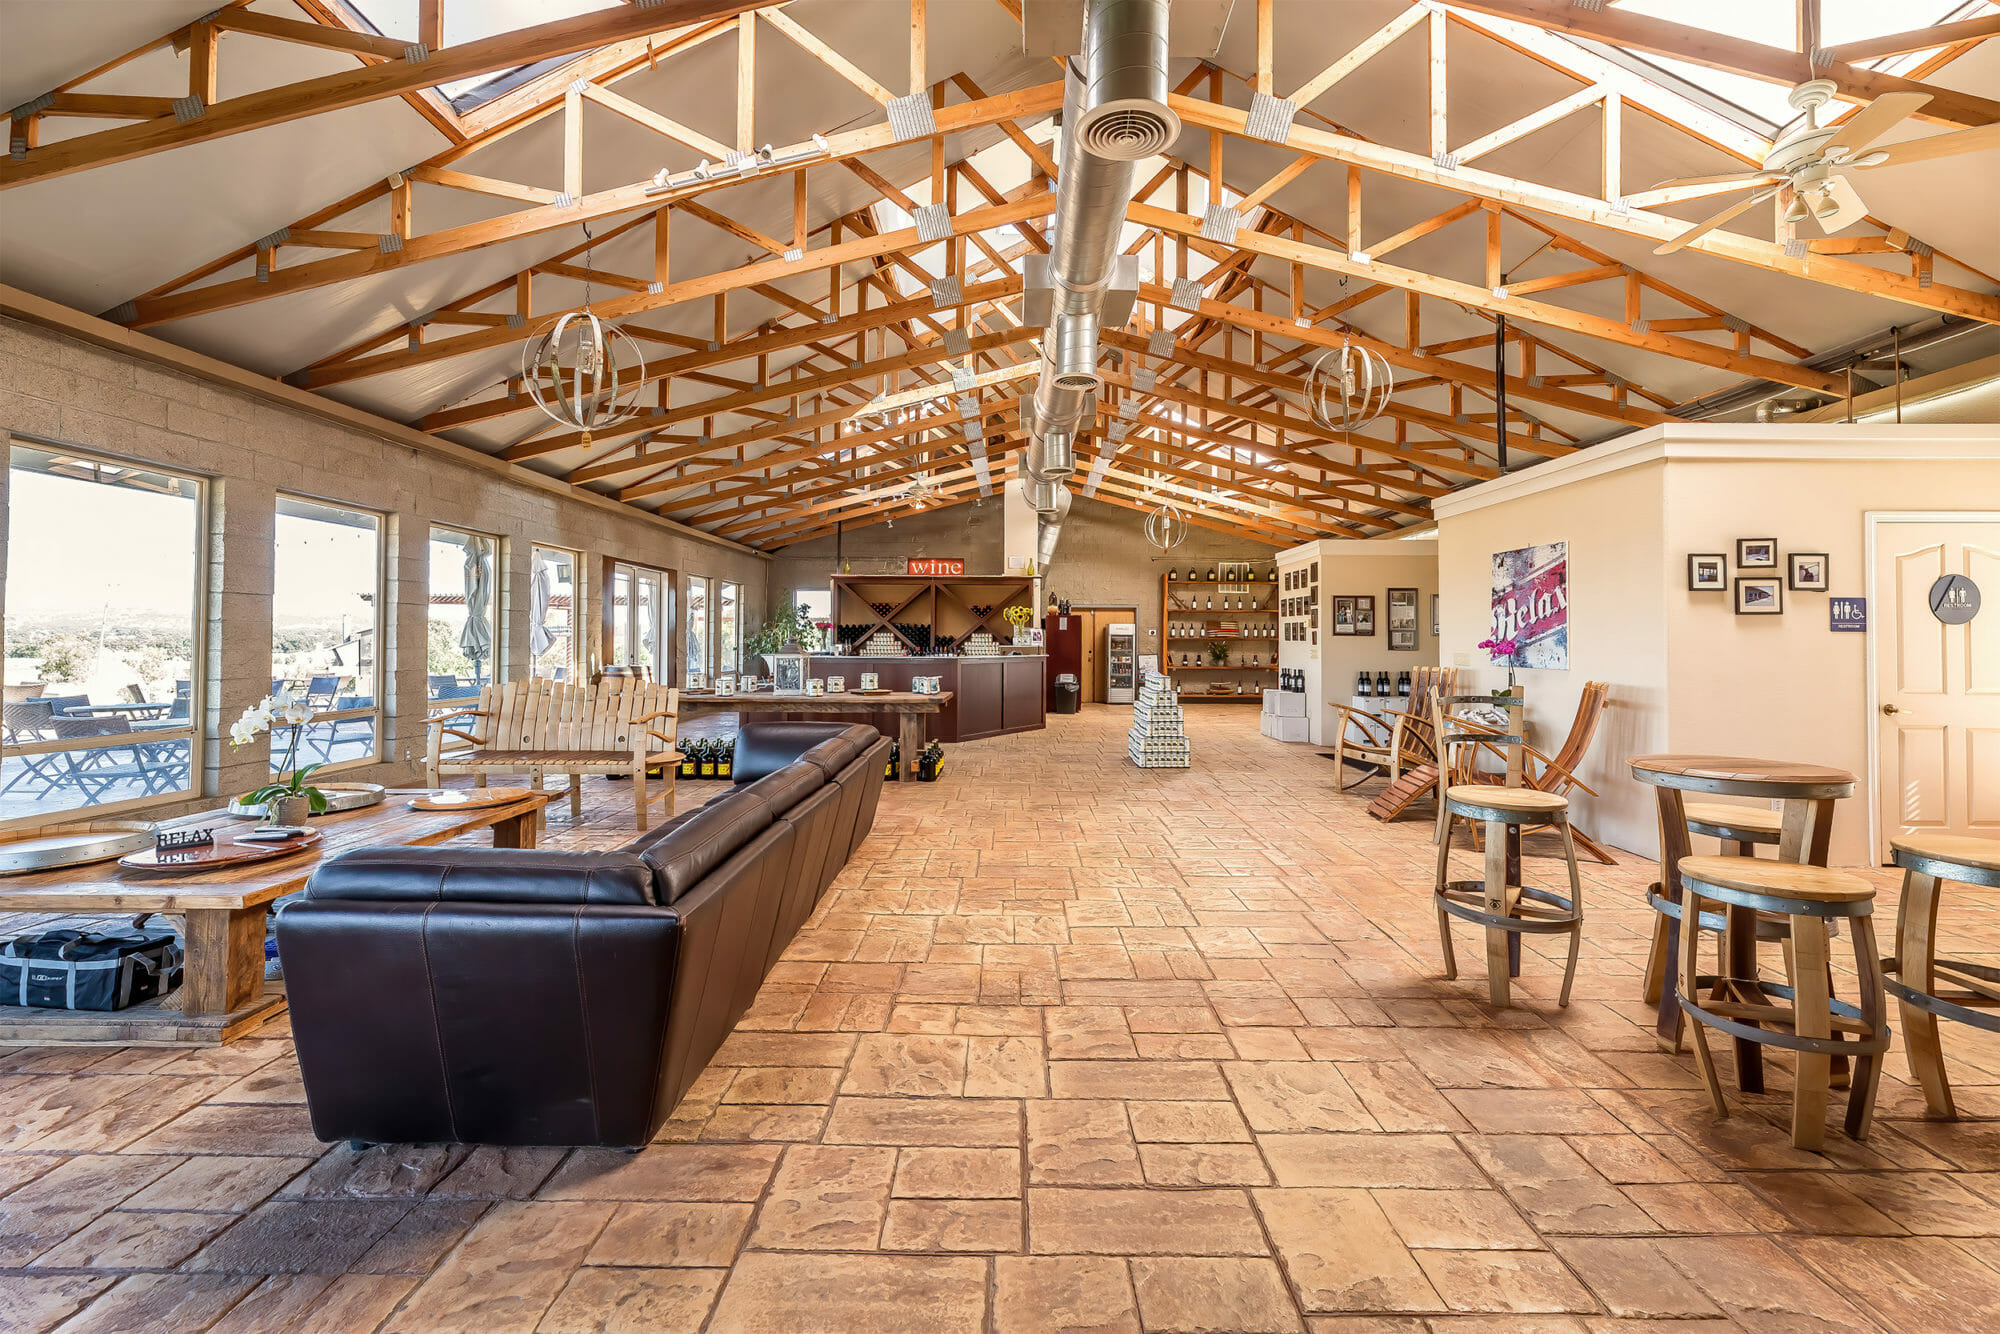 inside of tasting room with exposed vaulted ceiling